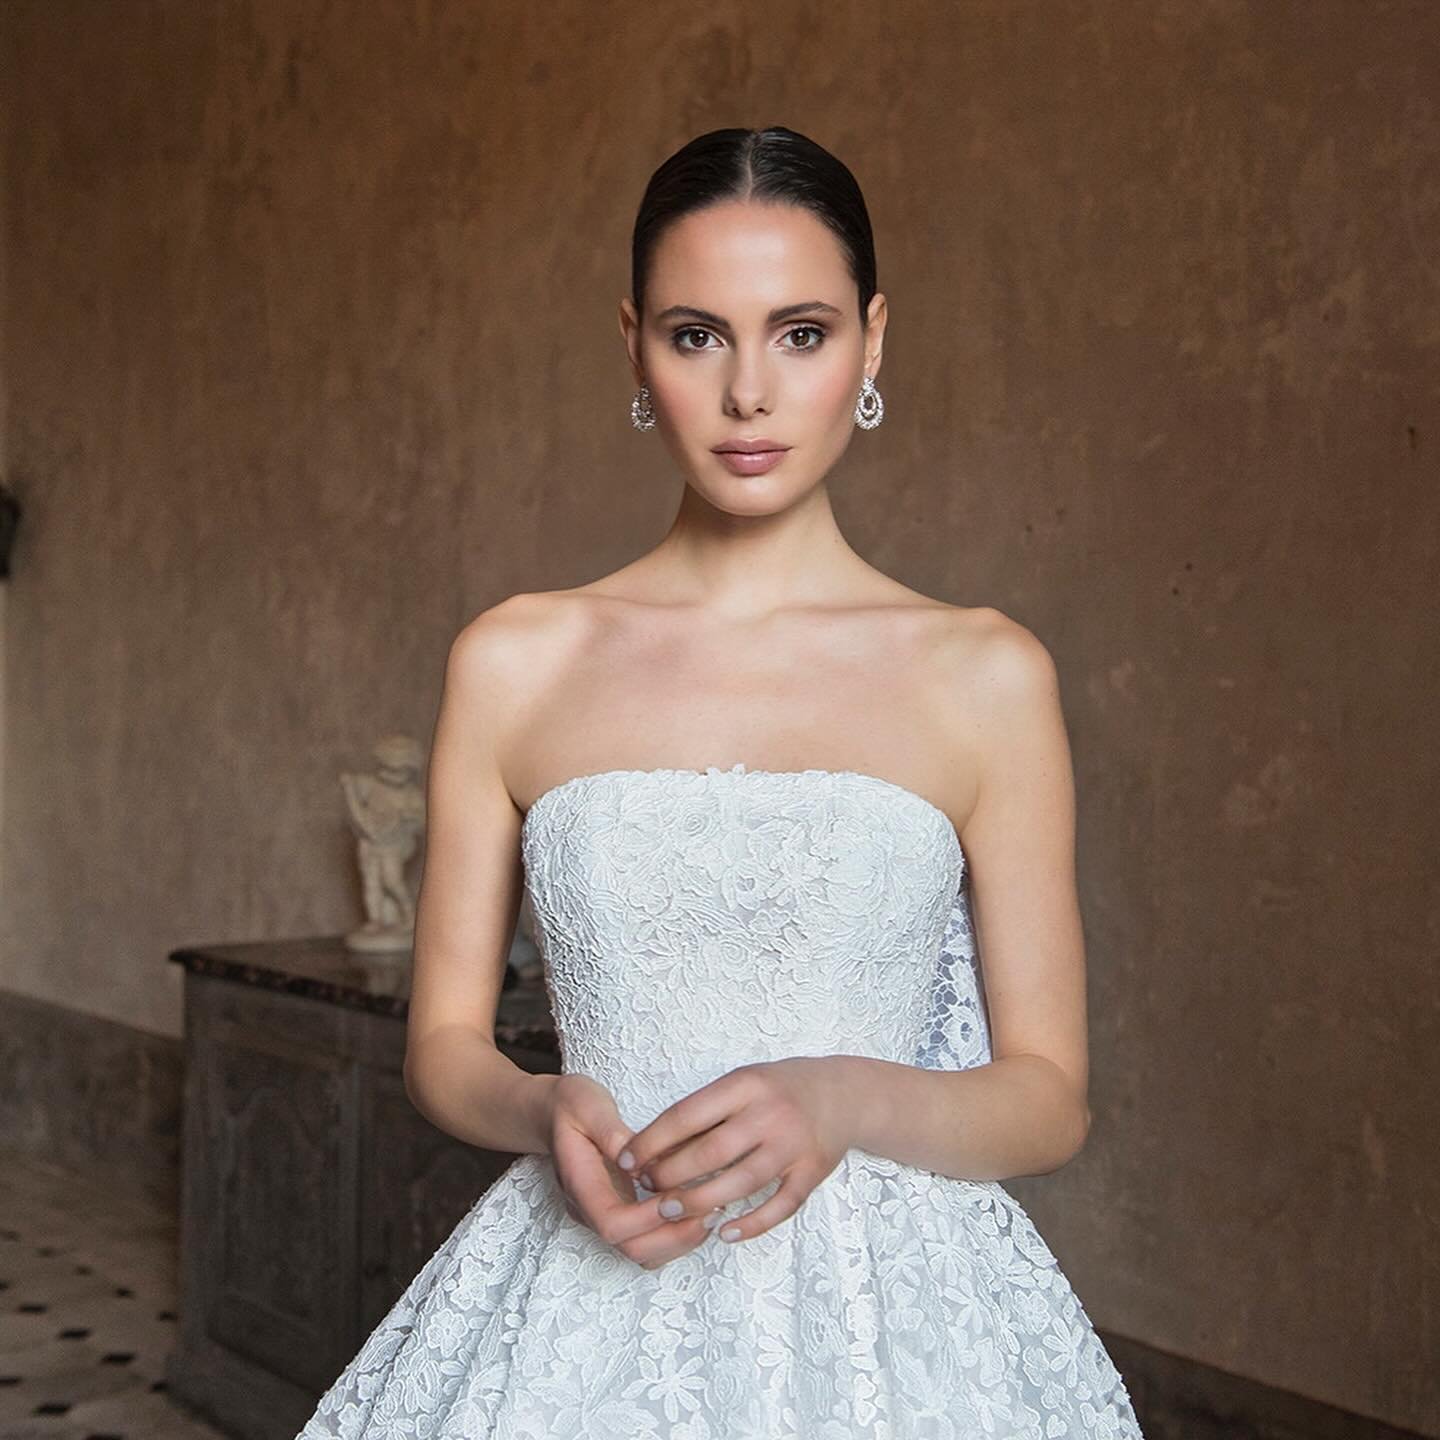 NADINE 🤍 Peter Langner&rsquo;s &ldquo;Nadine&rdquo; gown tells the story of timeless elegance. 
⠀⠀⠀⠀⠀⠀⠀⠀⠀
&ldquo;Nadine&rdquo; is strapless crinoline ball gown, entirely hand-embroidered with guipure lace flowers, cut form the lace fabric and sewn o